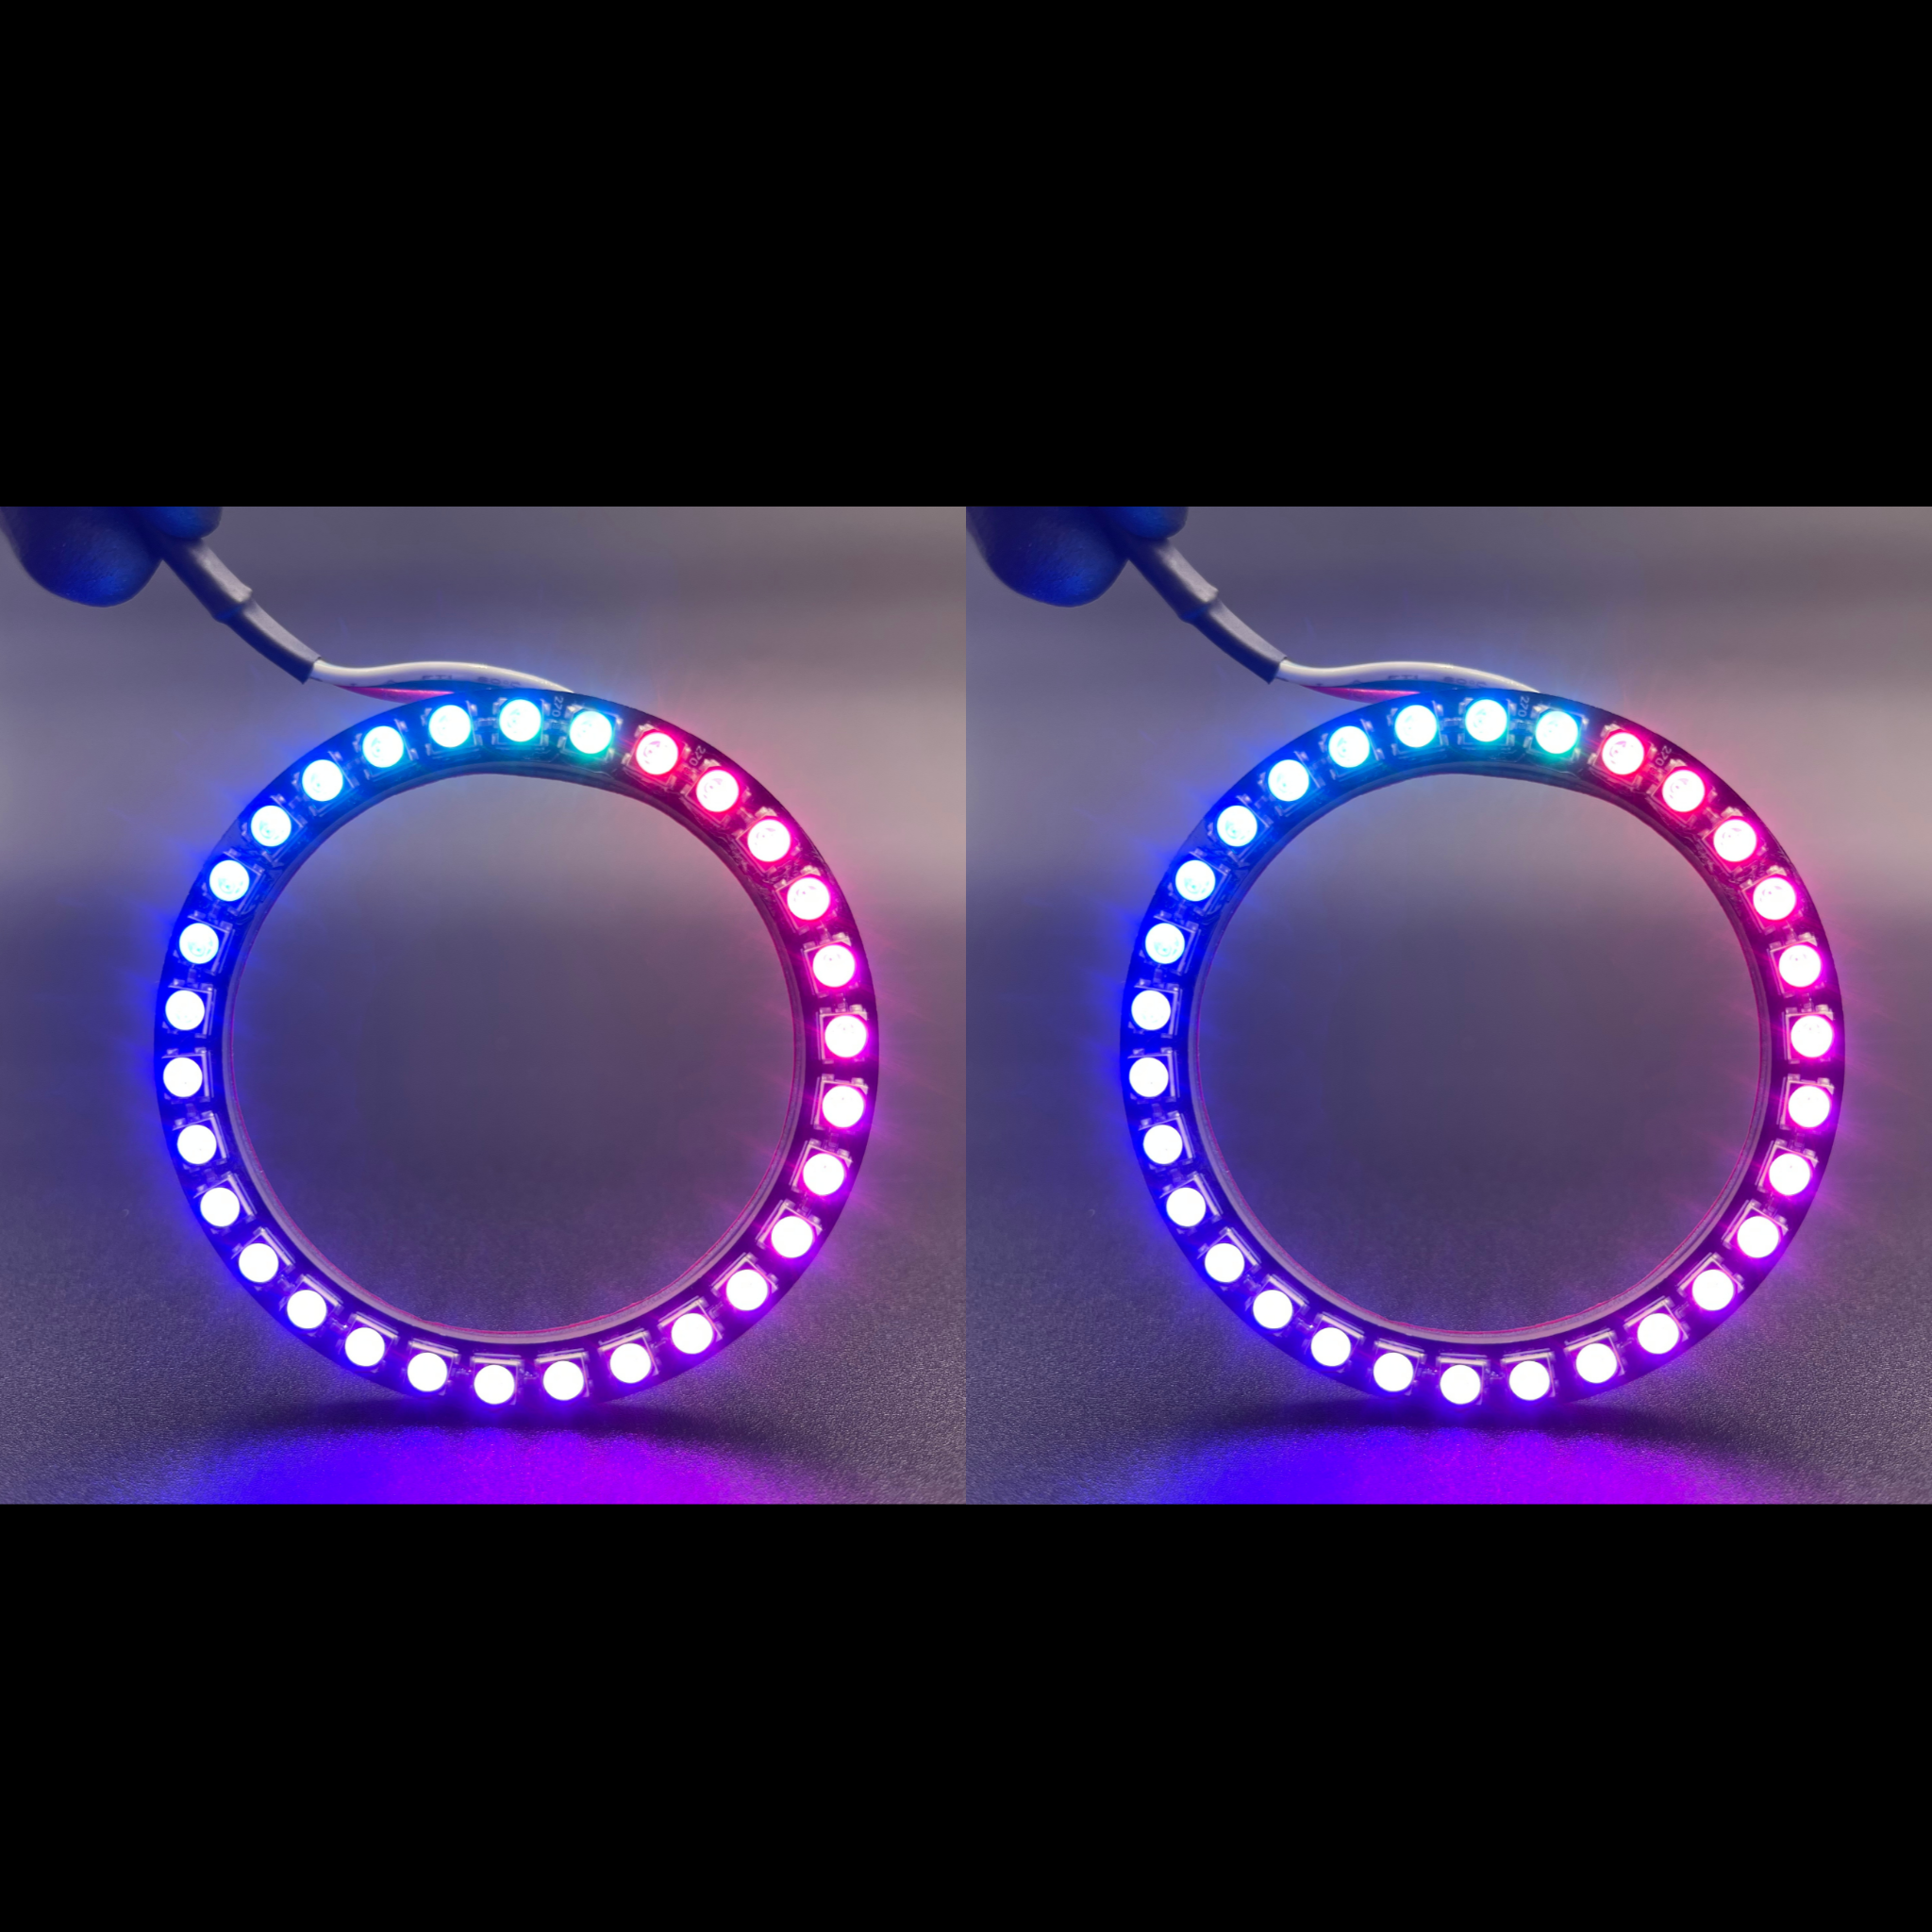 1987-1993 Ford Mustang Multicolor Halo Kit - RGB Halo Kits Multicolor Flow Series Color Chasing RGBWA LED headlight kit Colorshift Oracle Lighting Trendz OneUpLighting Morimoto theretrofitsource AutoLEDTech Diode Dynamics